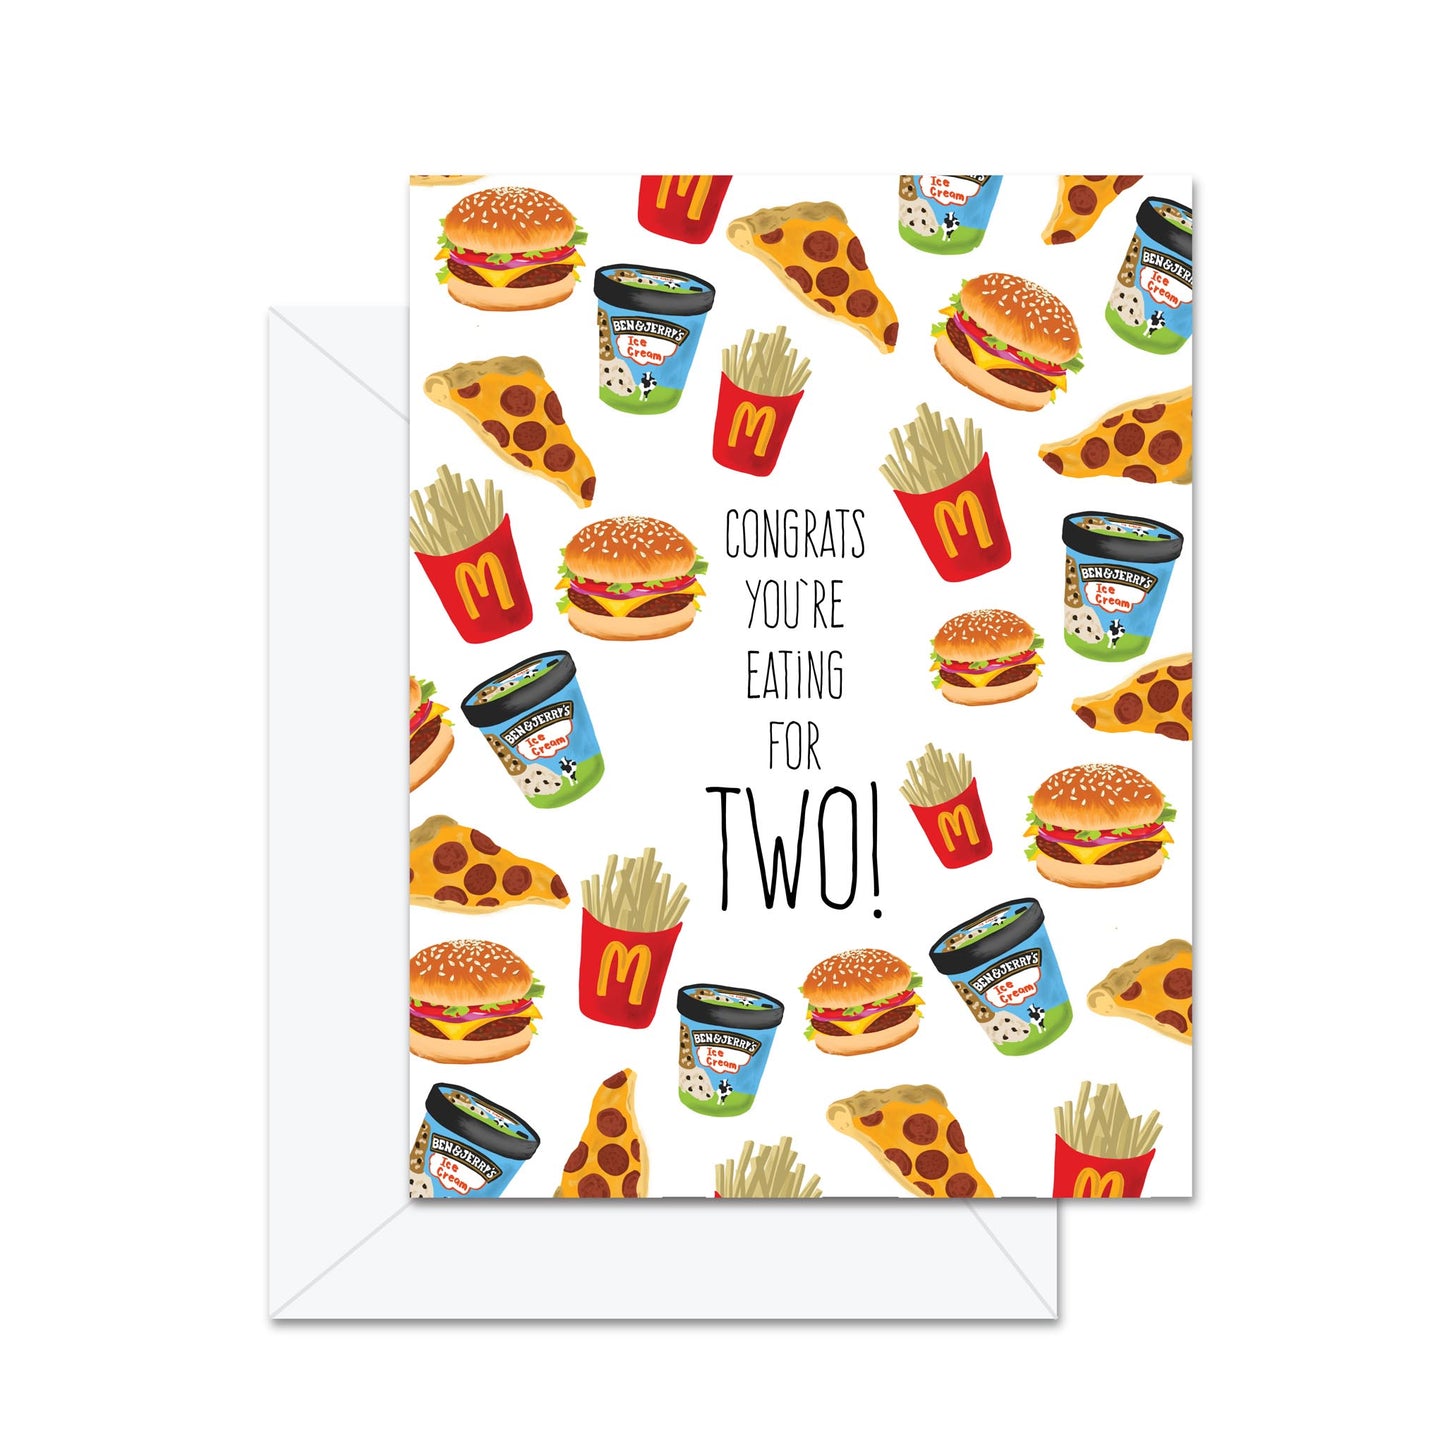 Congrats You're Eating For Two! - Greeting Card